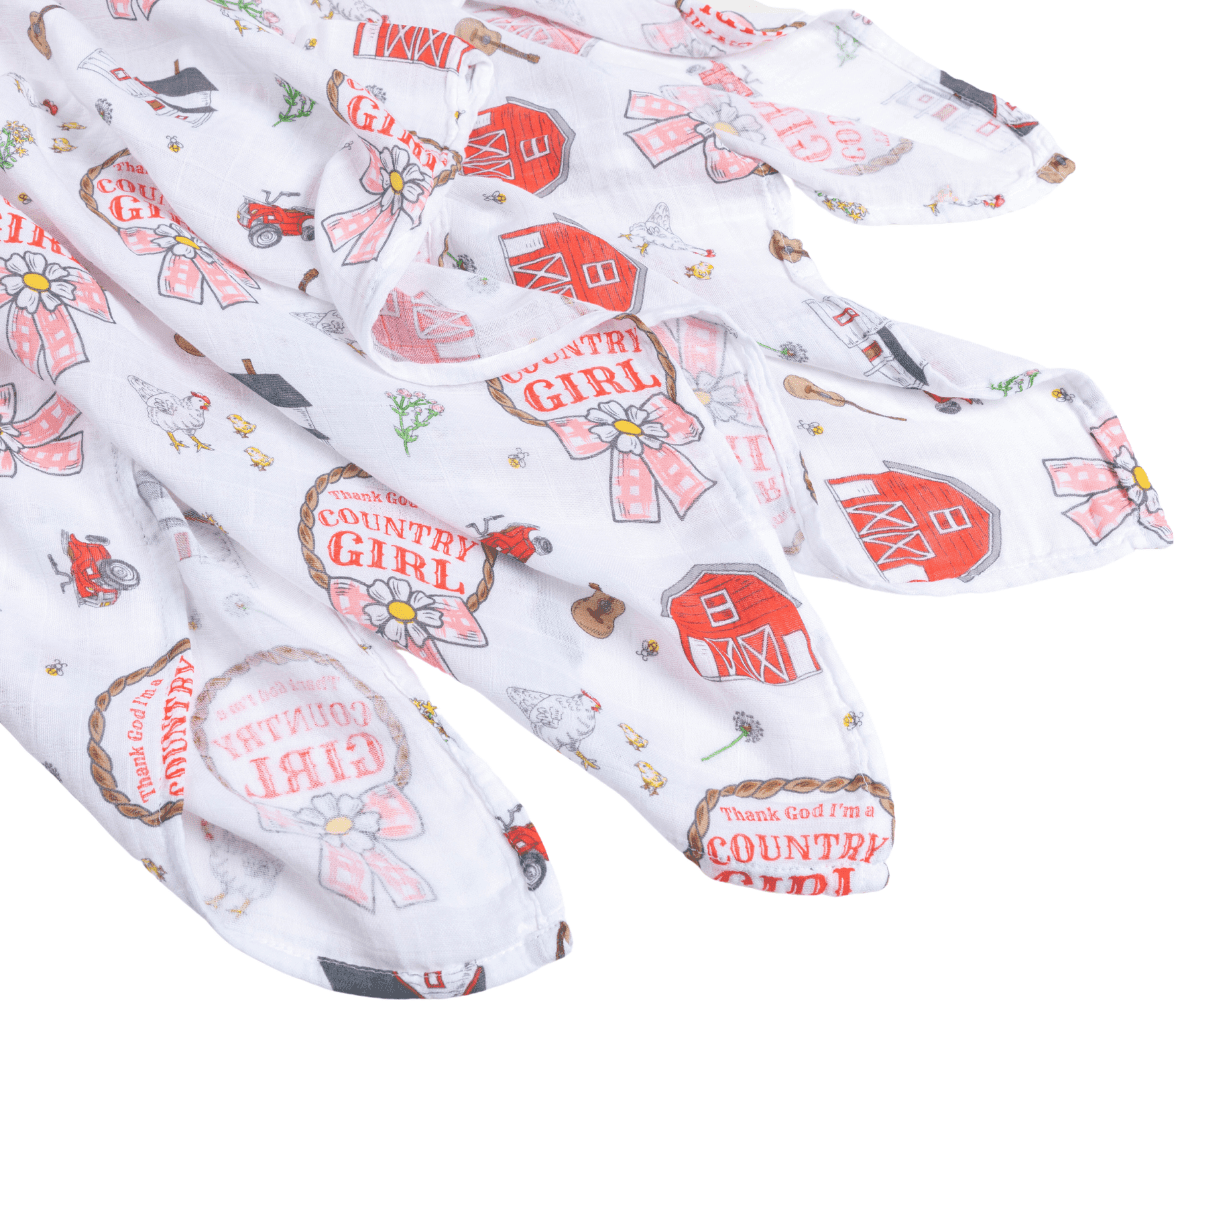 Country Girl muslin swaddle blanket with a floral pattern, featuring pink roses and green leaves on a white background.